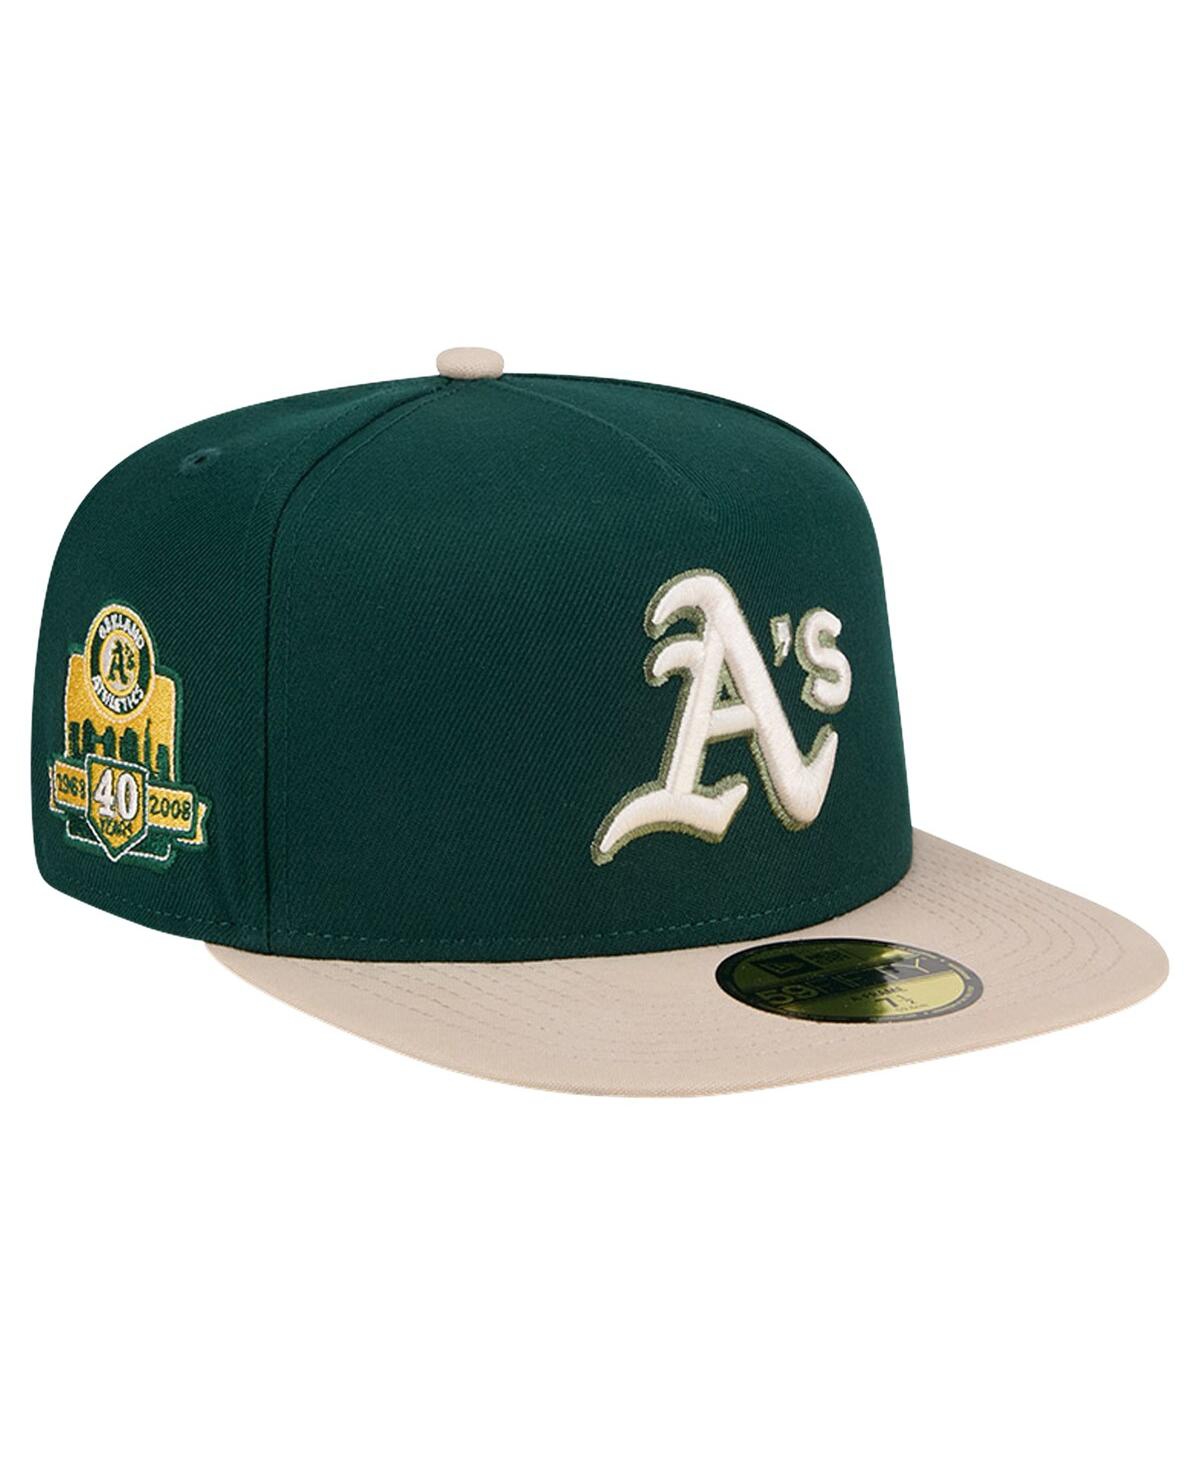 NEW ERA MEN'S NEW ERA GREEN OAKLAND ATHLETICS CANVAS A-FRAME 59FIFTY FITTED HAT